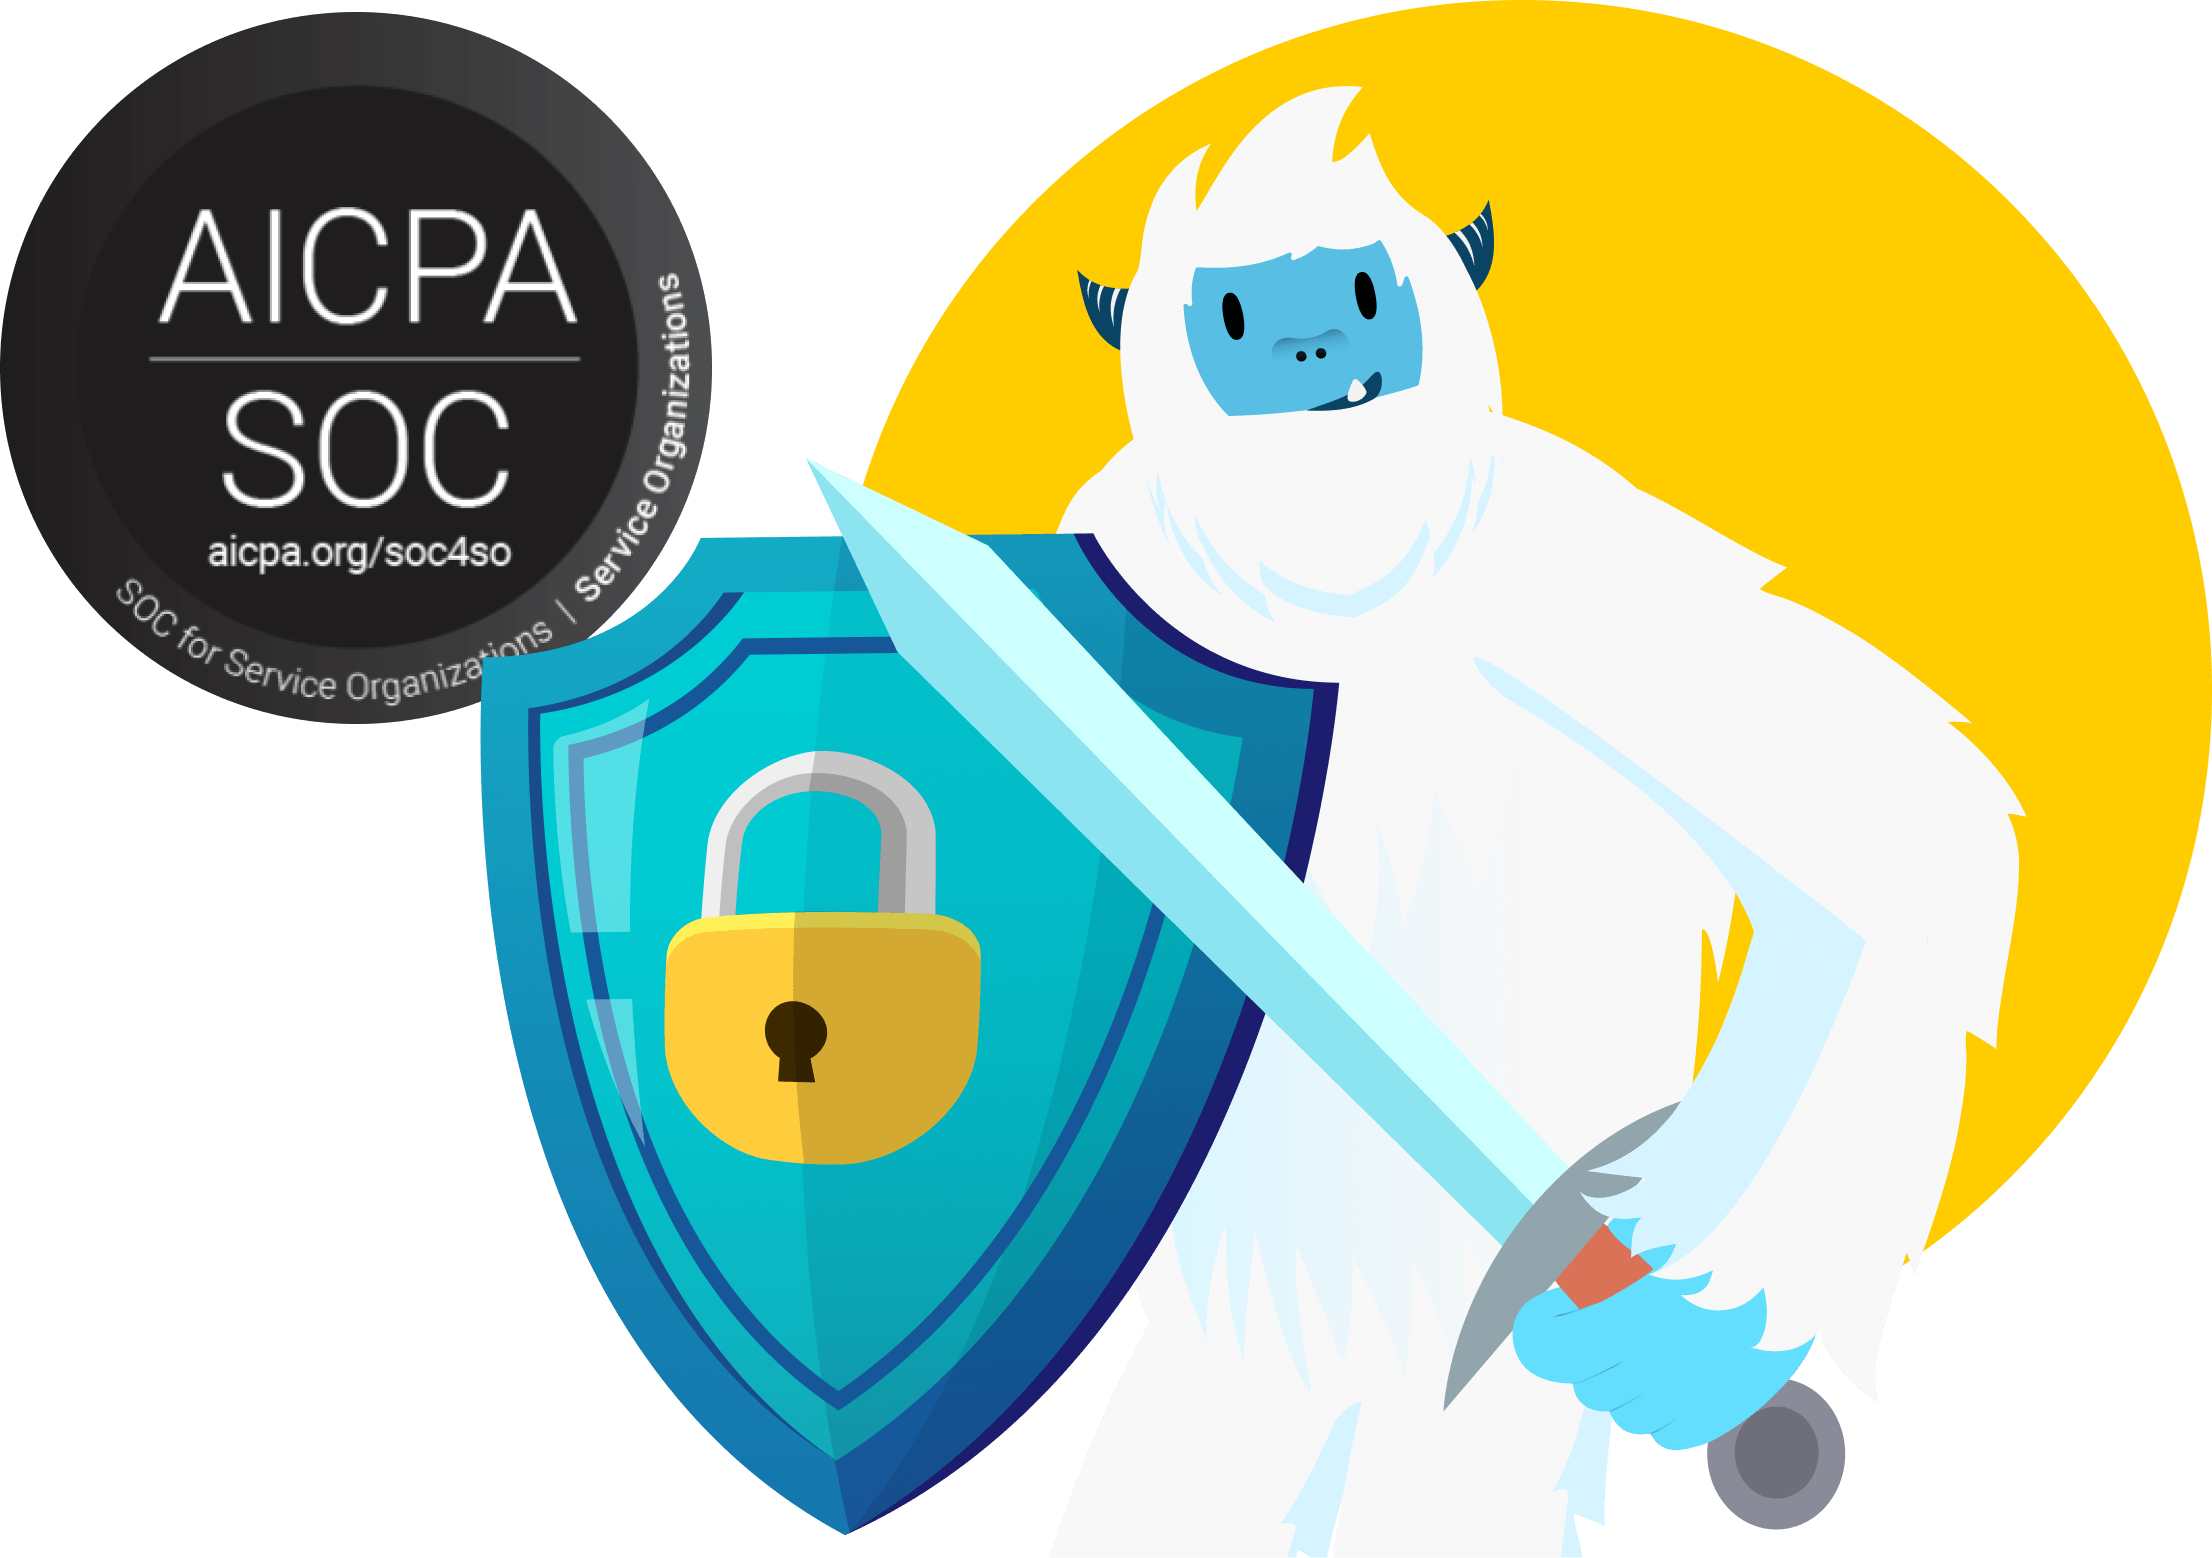 Illustration of Carl the Yei holding a sword and shield iwth a SOC compliance badge representing how Motivosity takes security seriously.